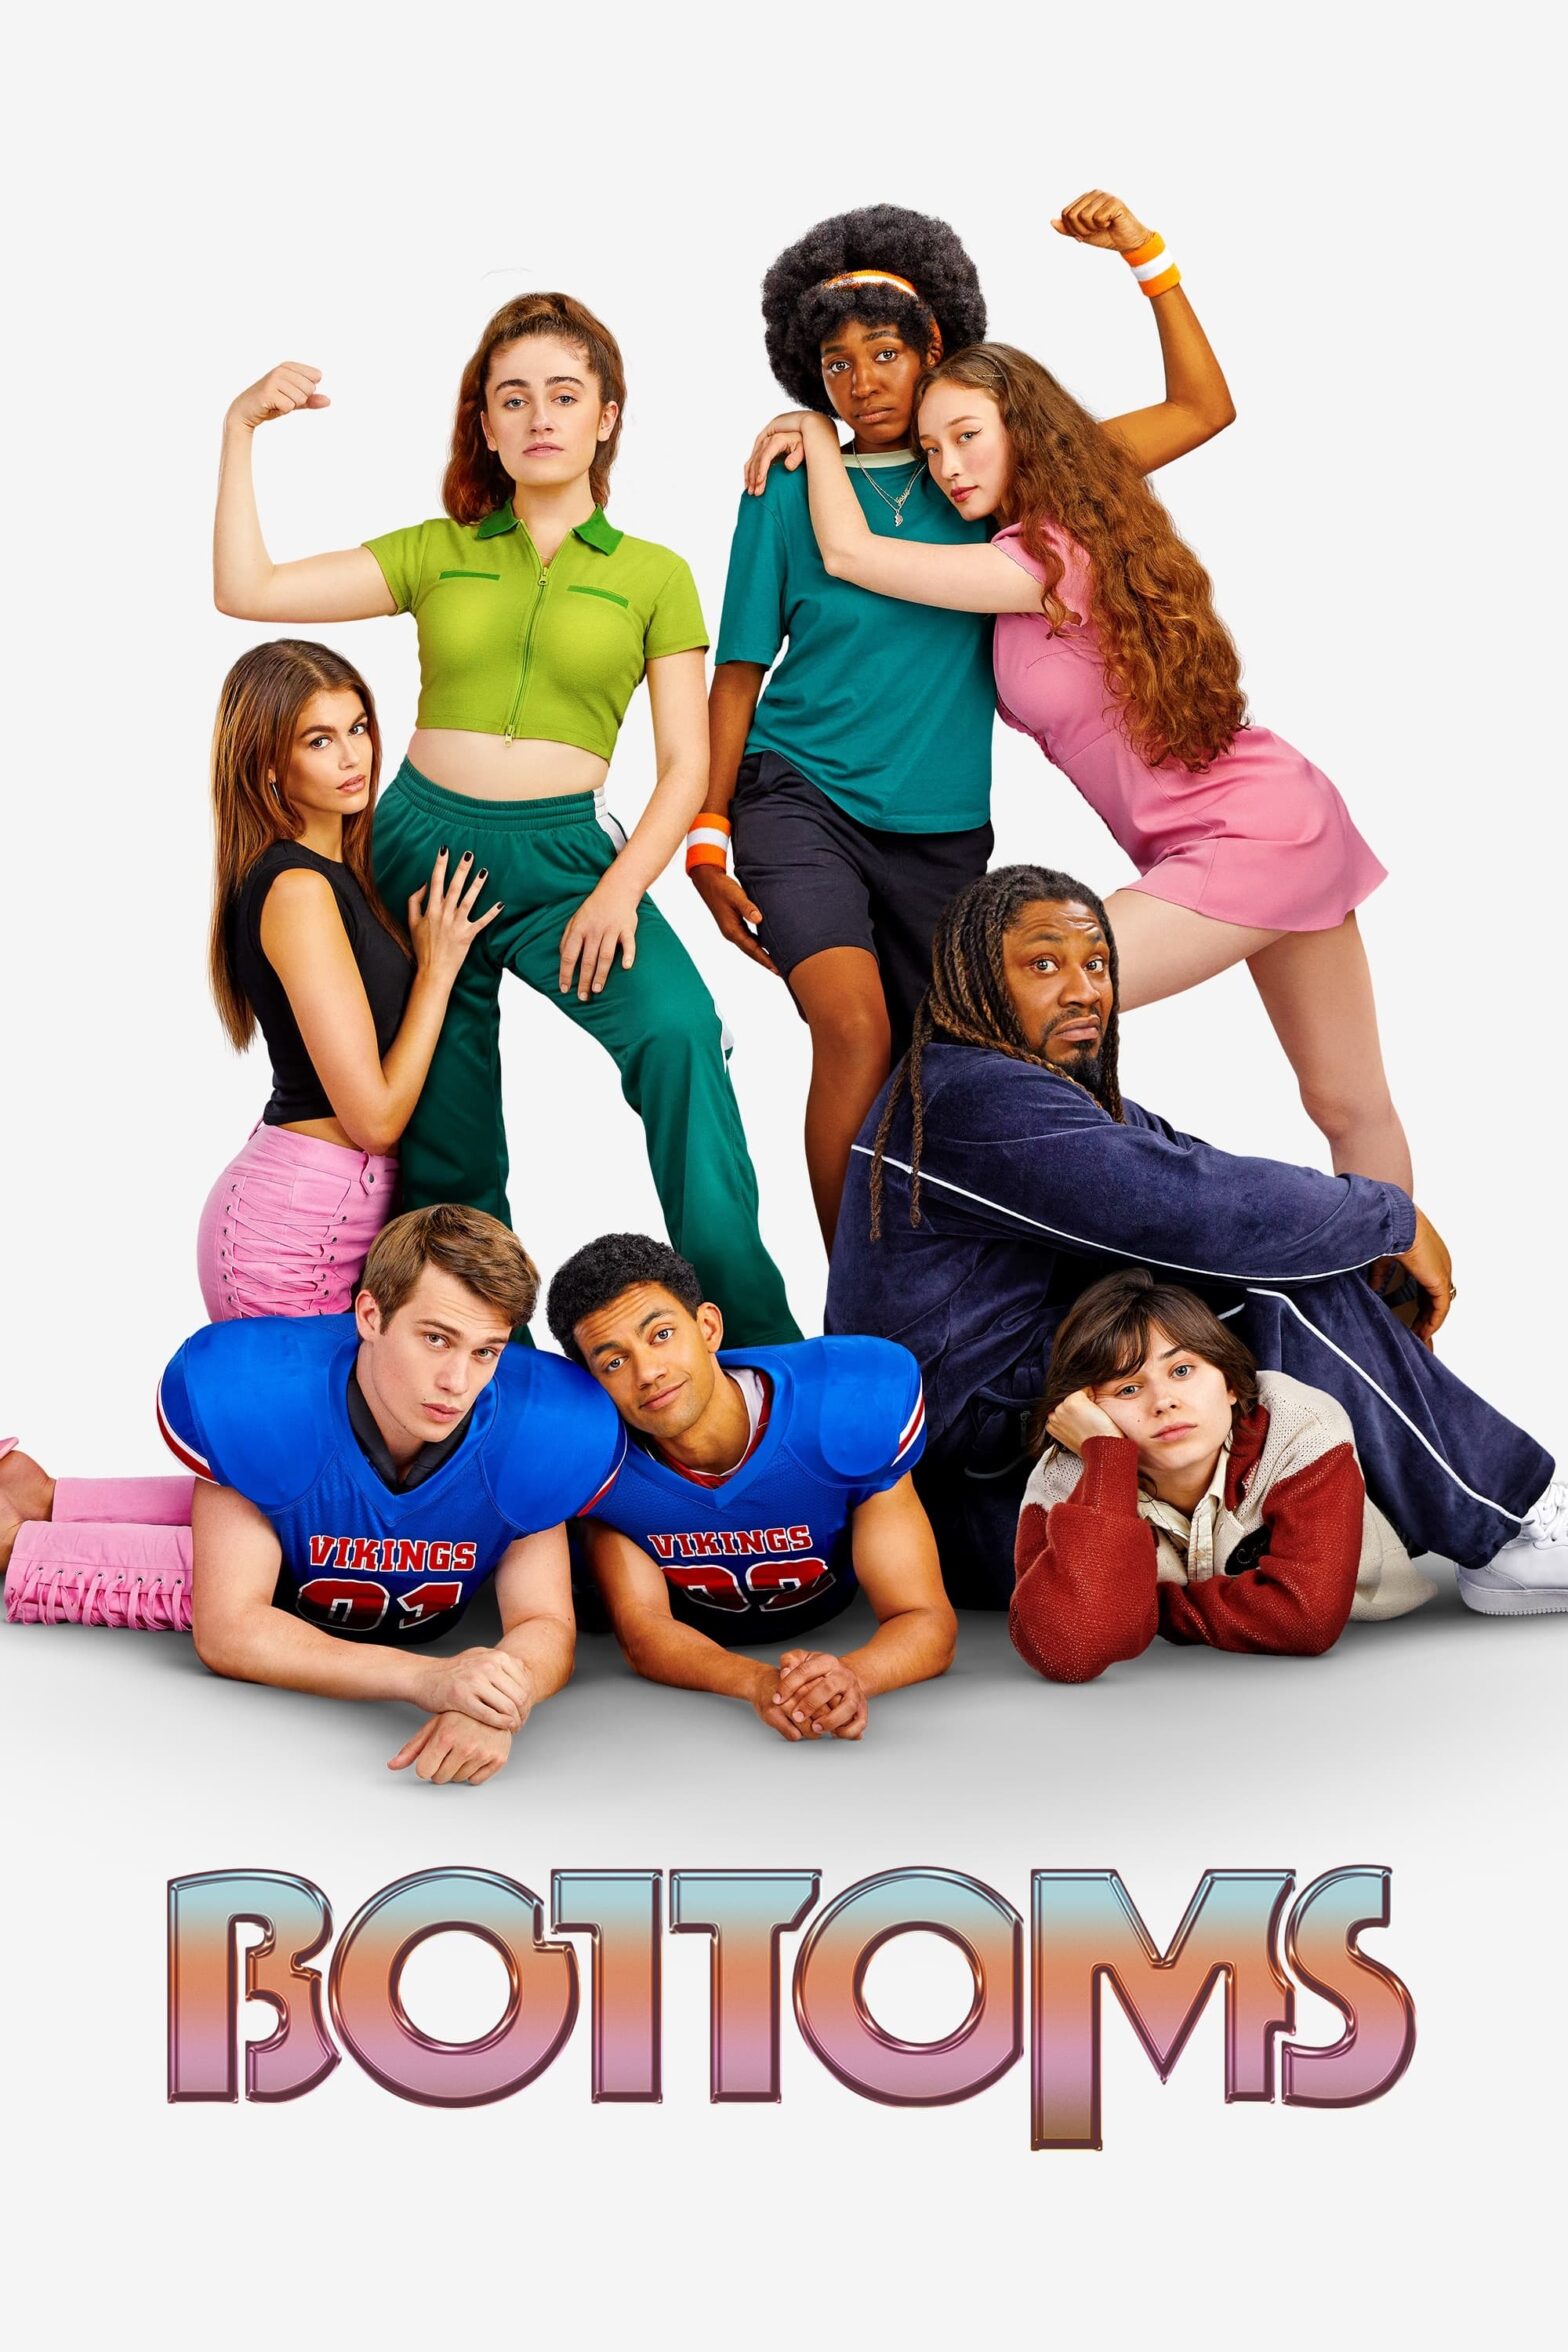 Poster for the movie "Bottoms"